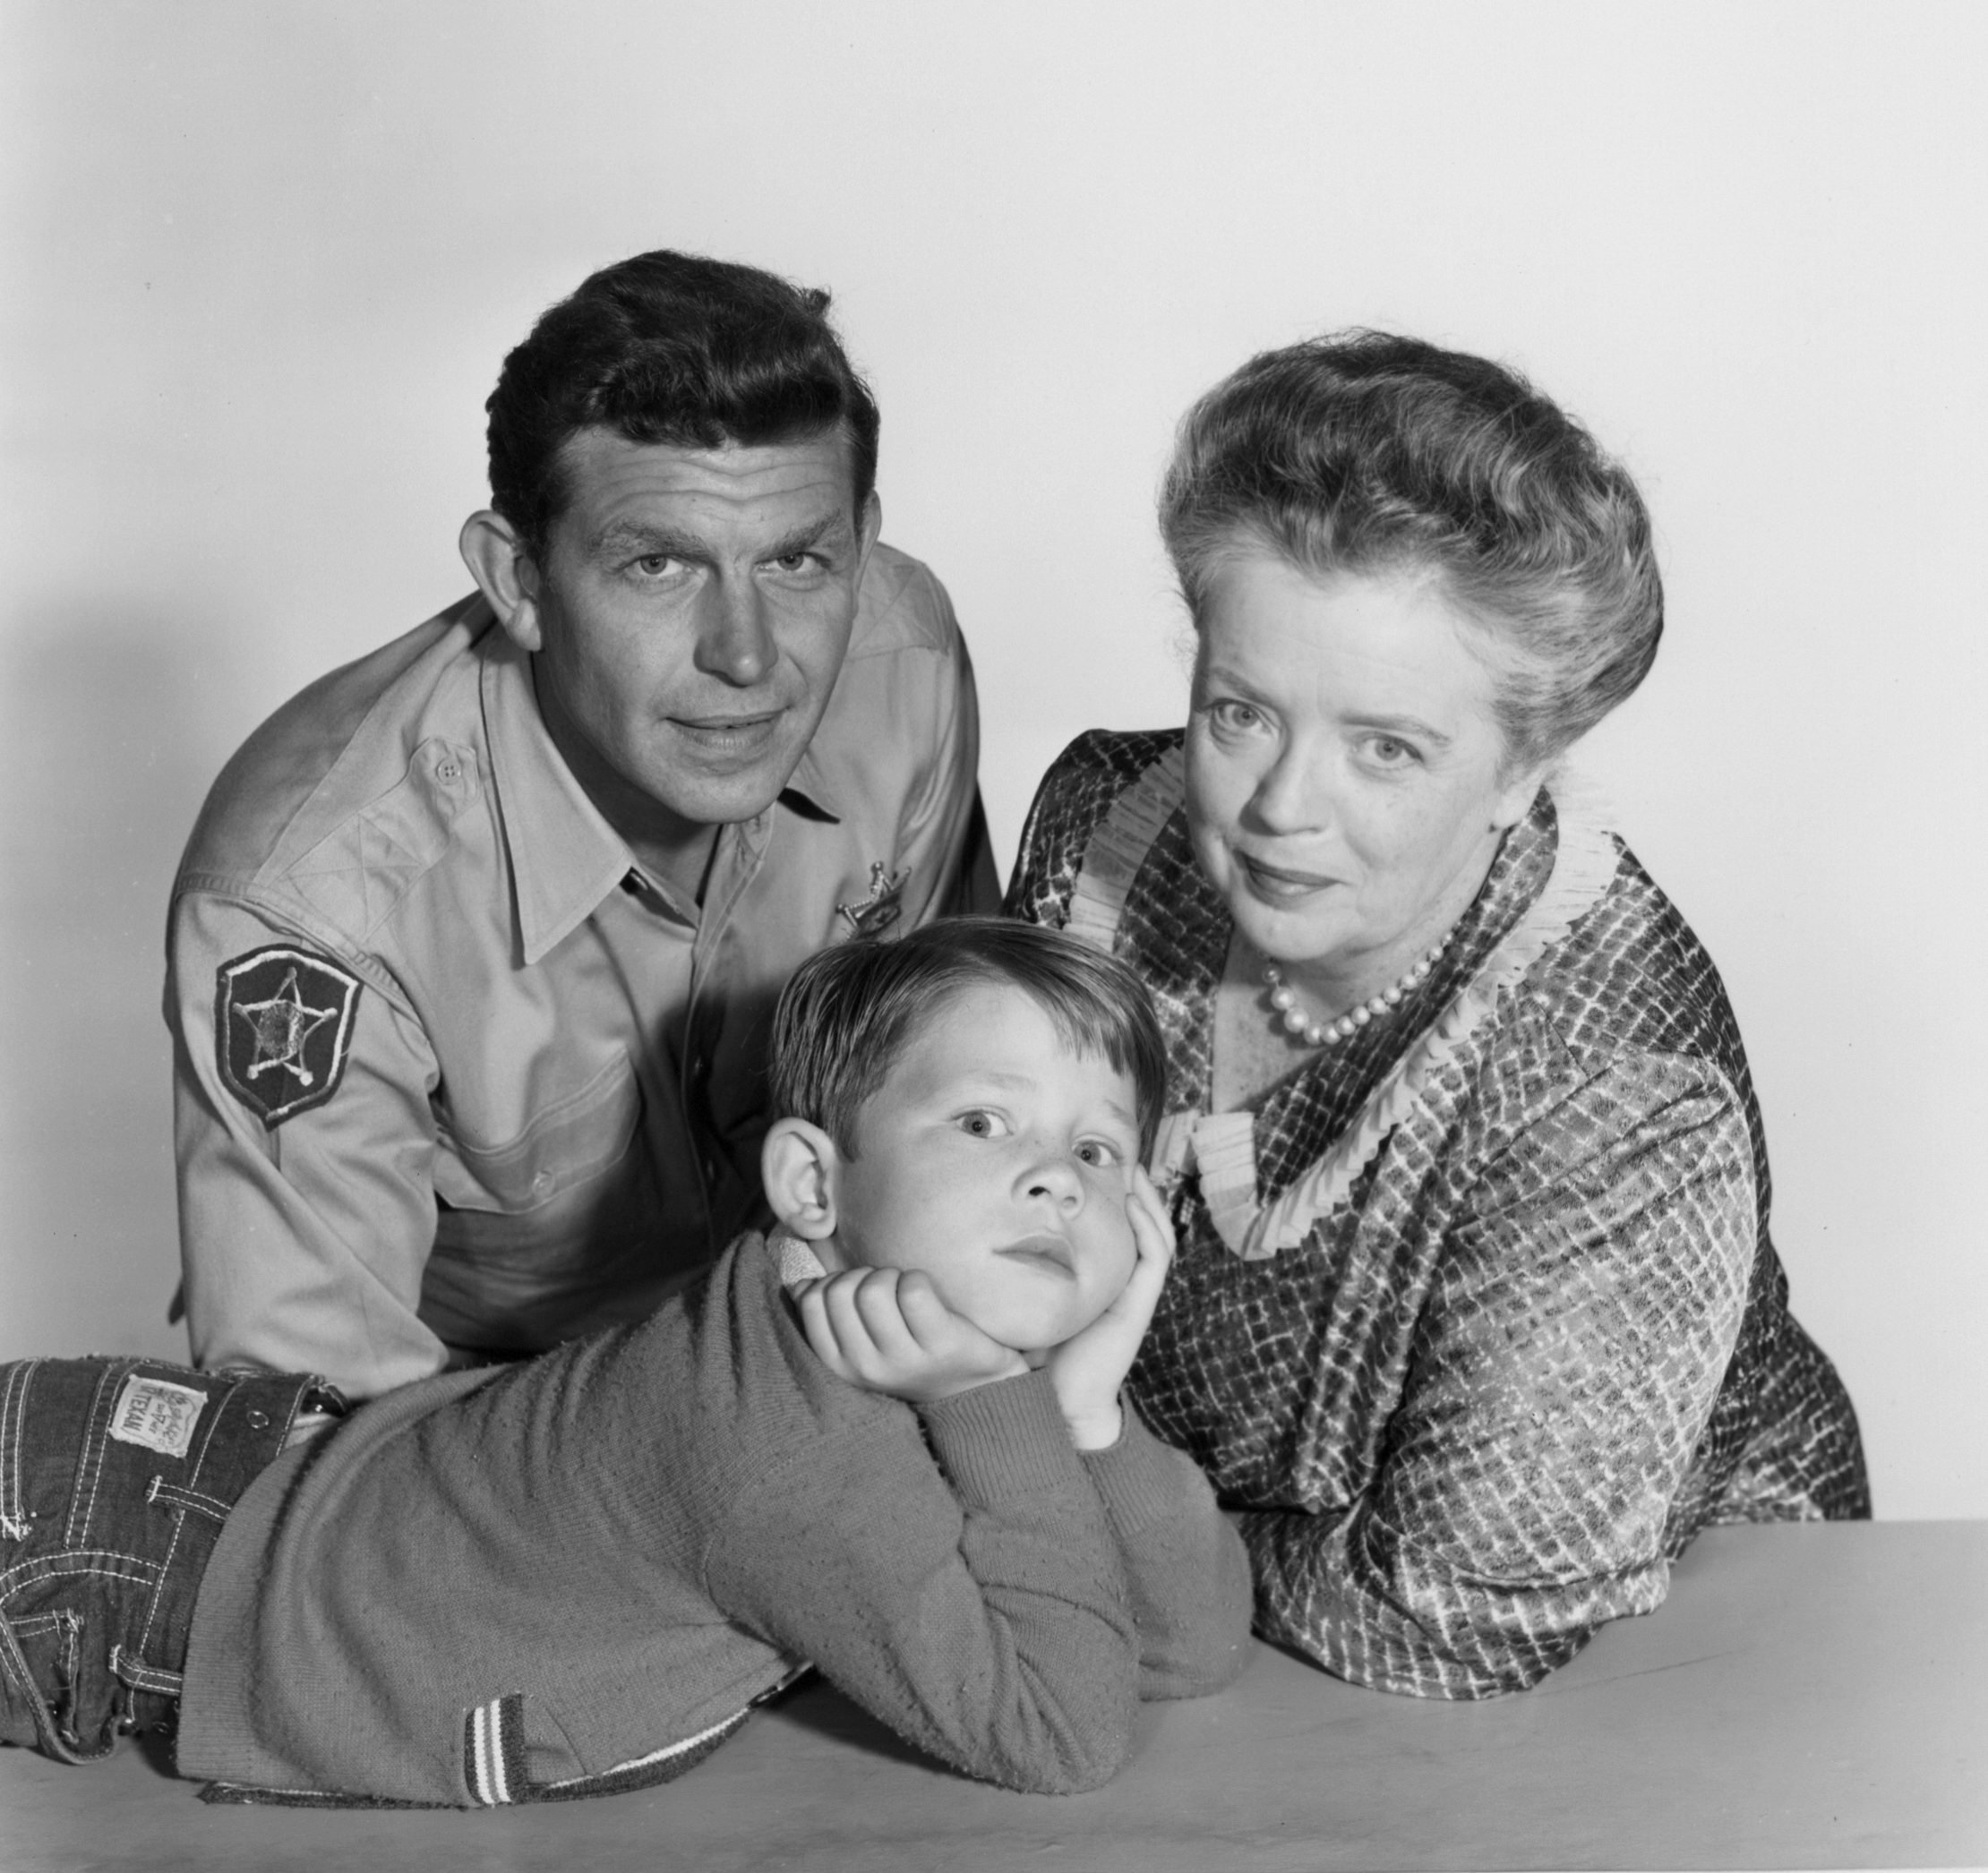 ‘The Andy Griffith Show’: An Off-Air Feud Led 1 Star To Quit the Series